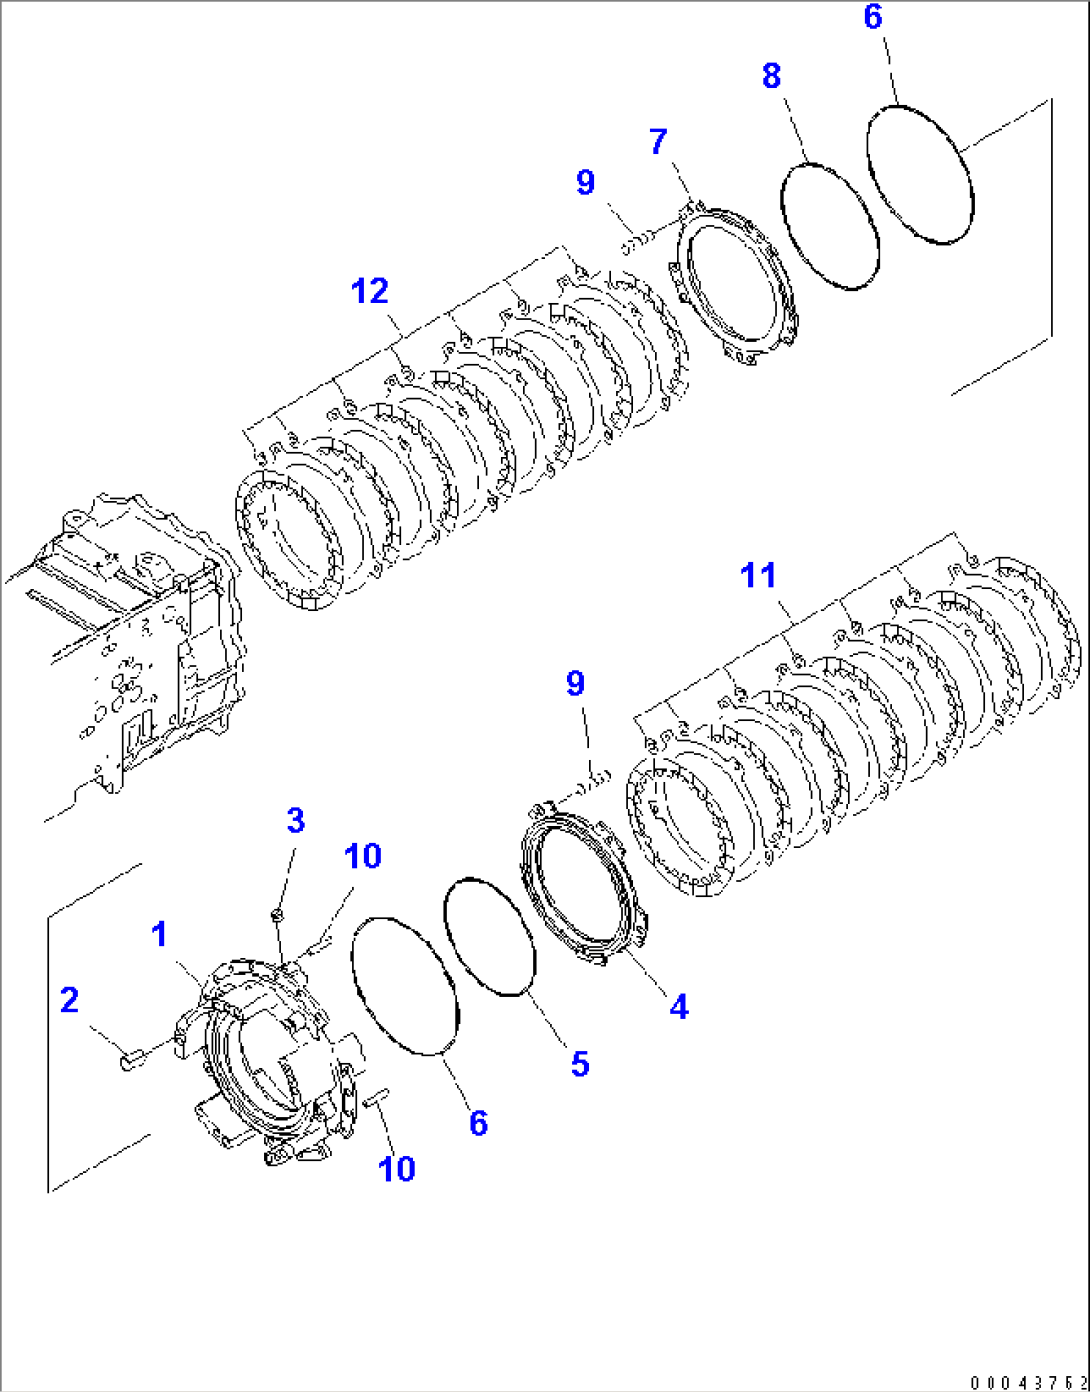 TRANSMISSION (REVERSE AND FORWARD HOUSING)(#55001-)